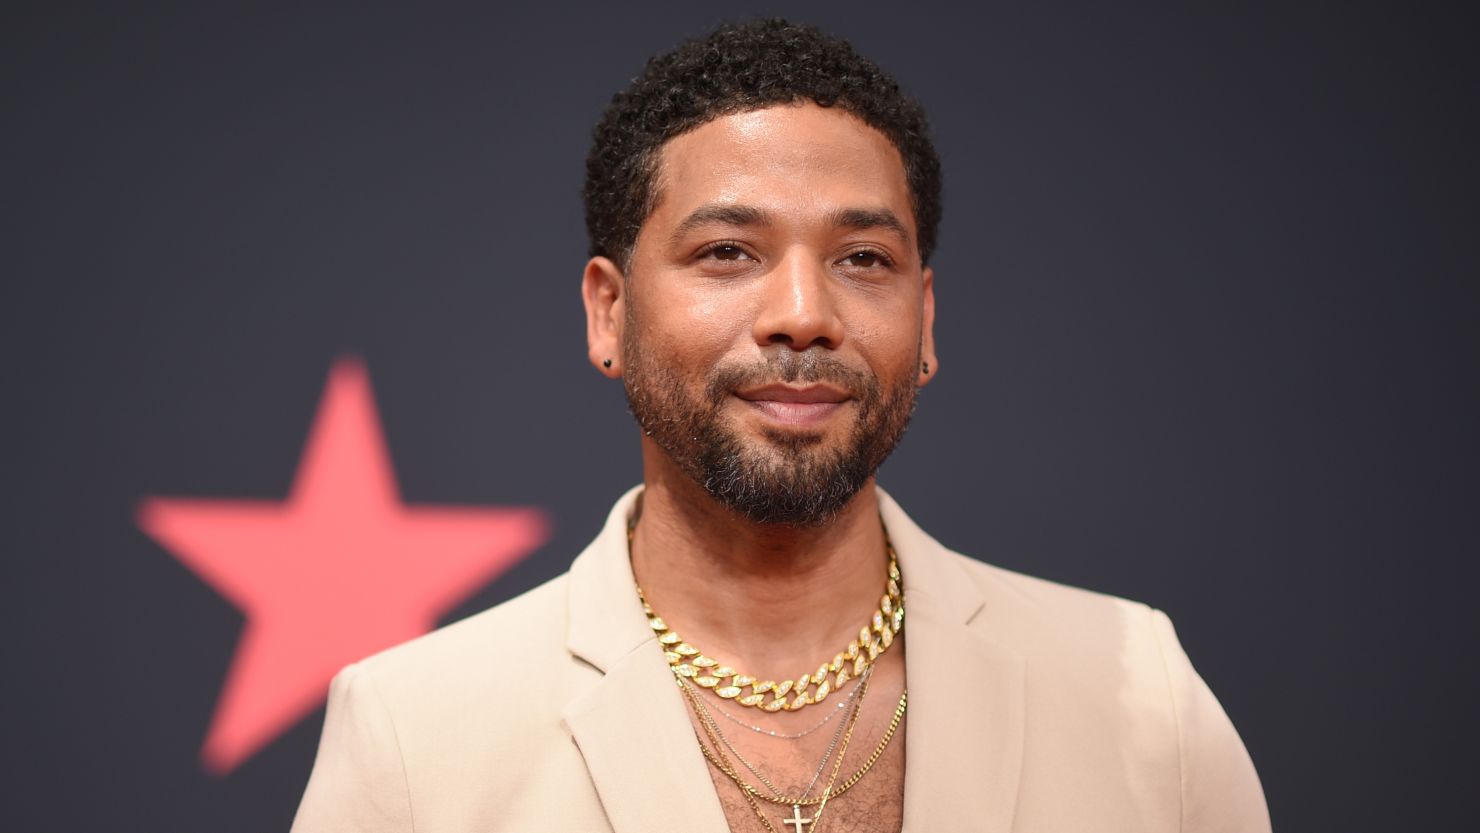 Jussie Smollett arrives at the BET Awards on Sunday, June 26, 2022, at the Microsoft Theater in Los Angeles.